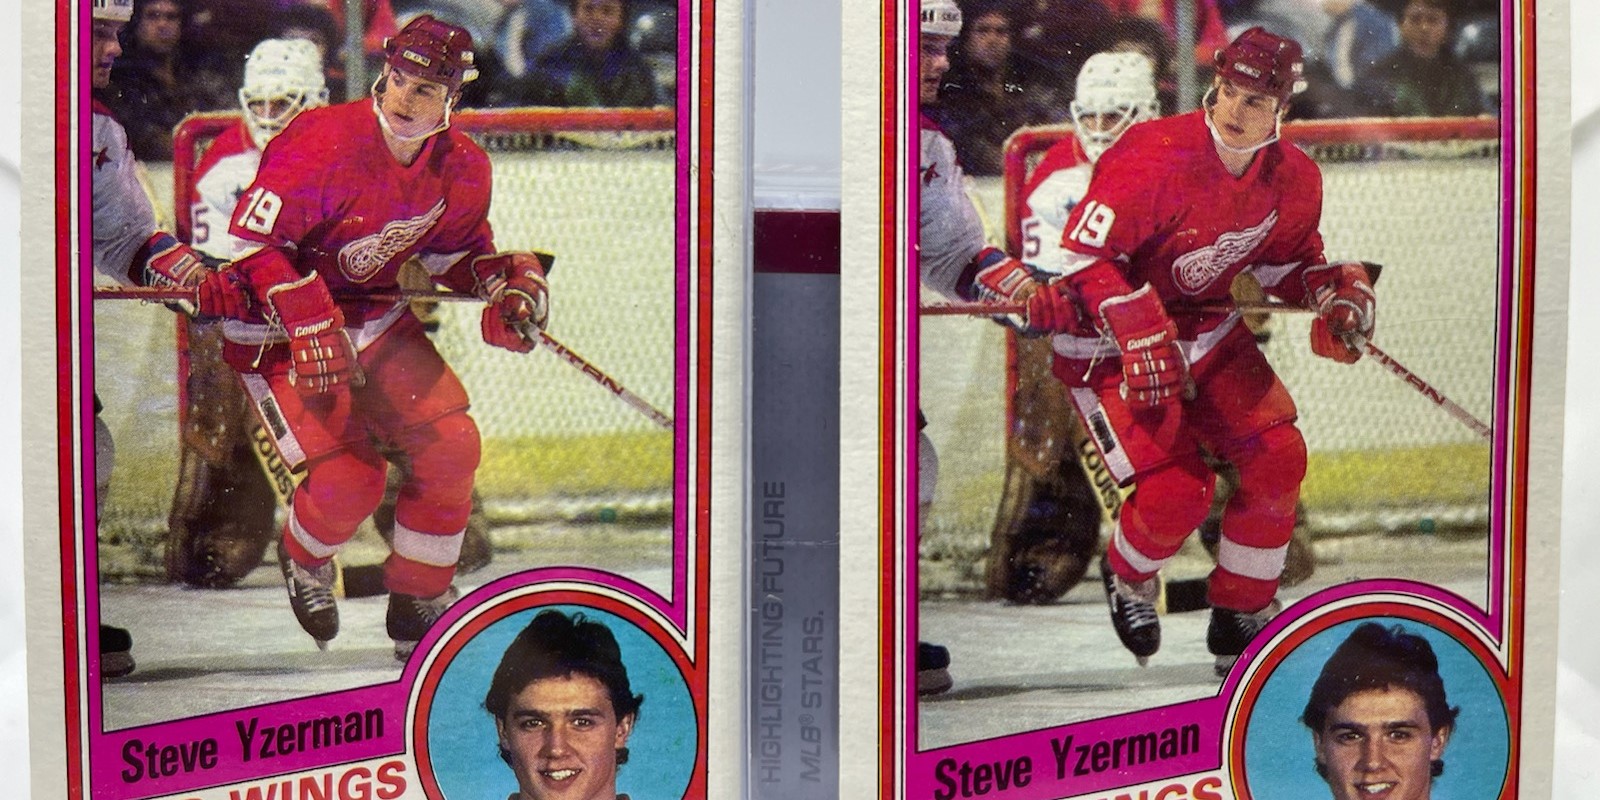 TWO Steve Yzerman Rookie Cards Pulled from the SAME 1984 Topps Pack in Called Electric Pull